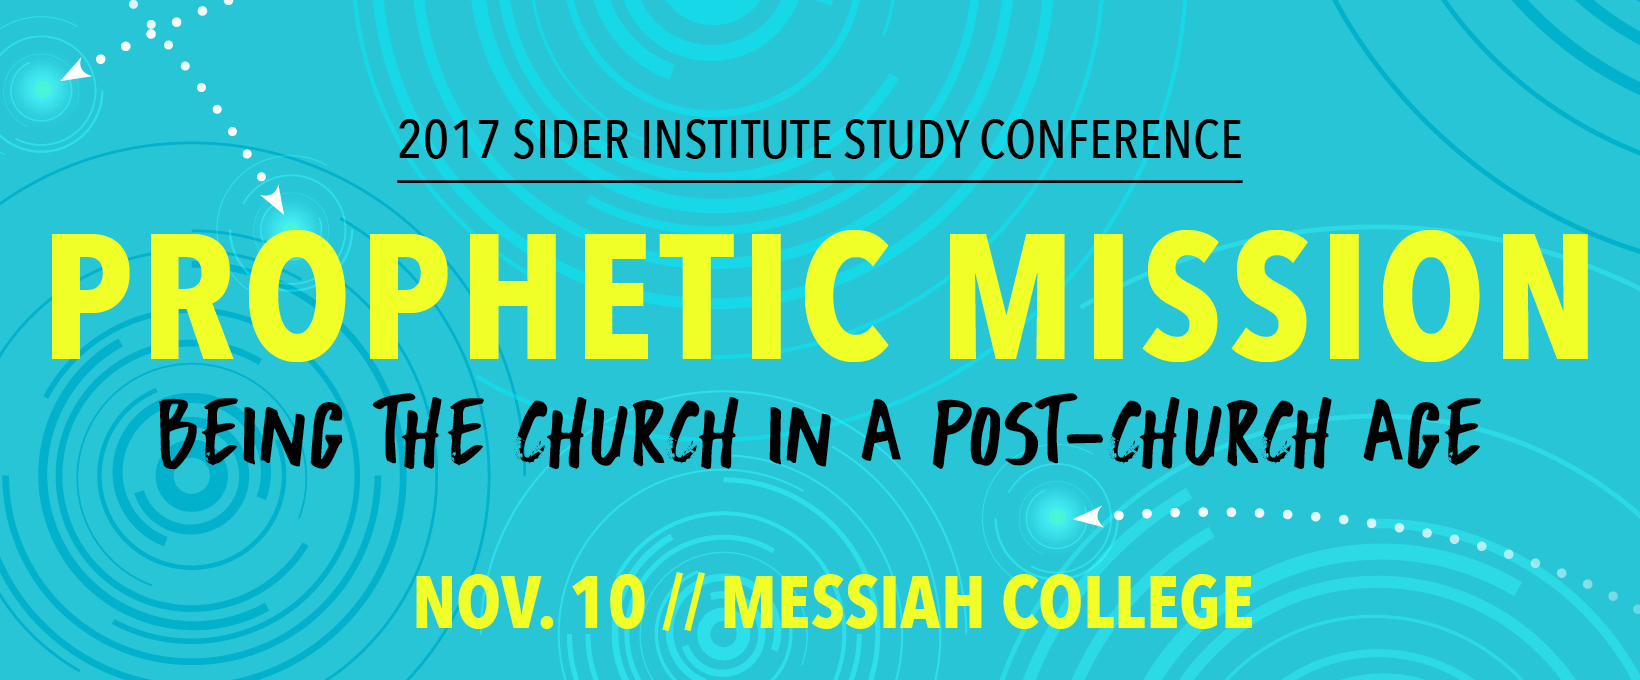 Banner for the 2017 Sider Institute study conference on "Prophetic Mission."